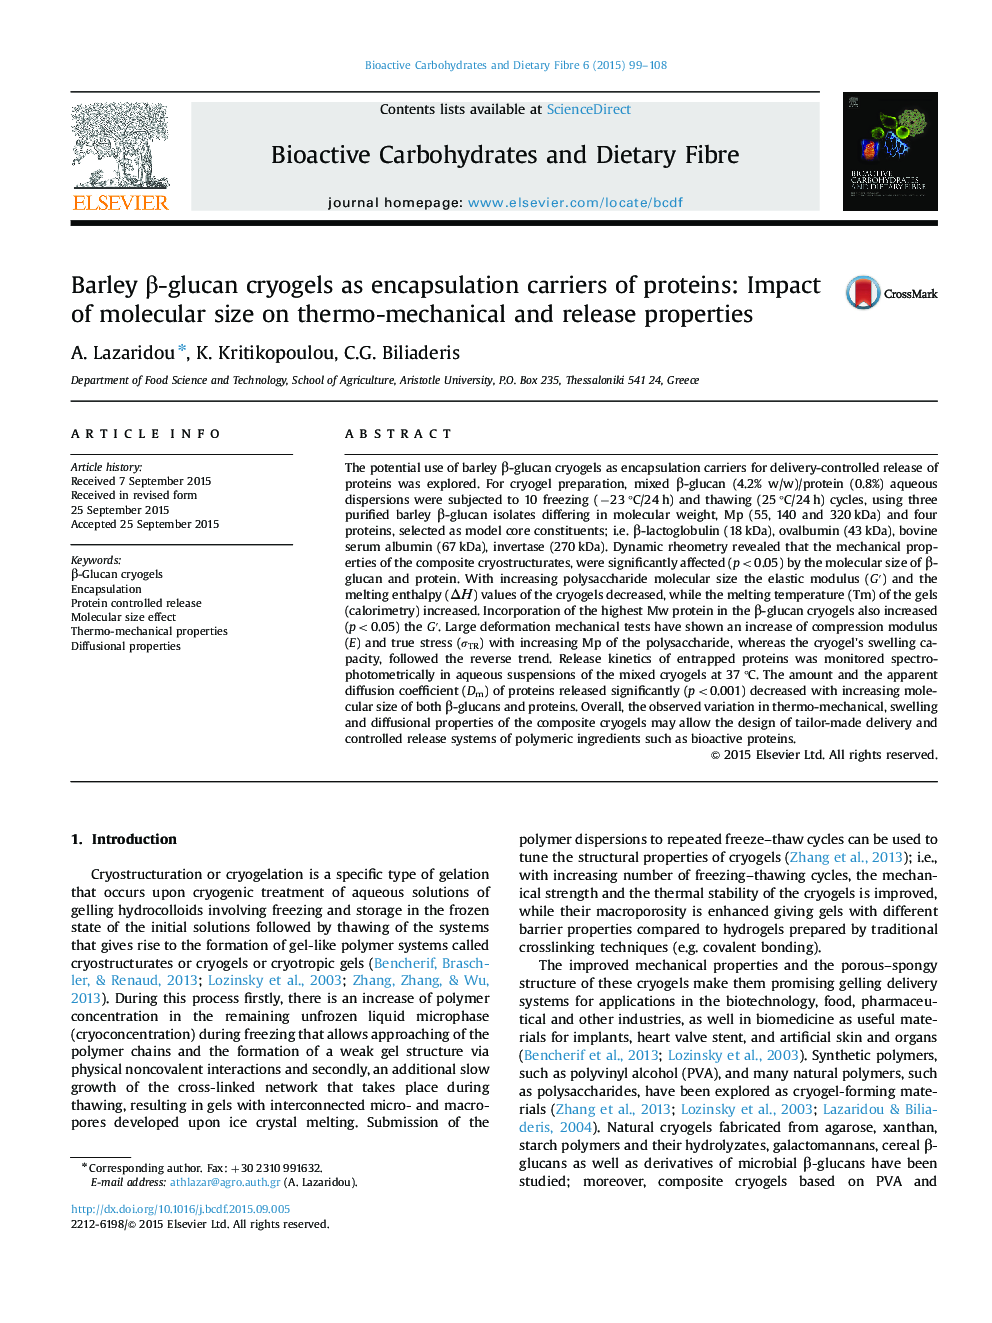 Barley β-glucan cryogels as encapsulation carriers of proteins: Impact of molecular size on thermo-mechanical and release properties